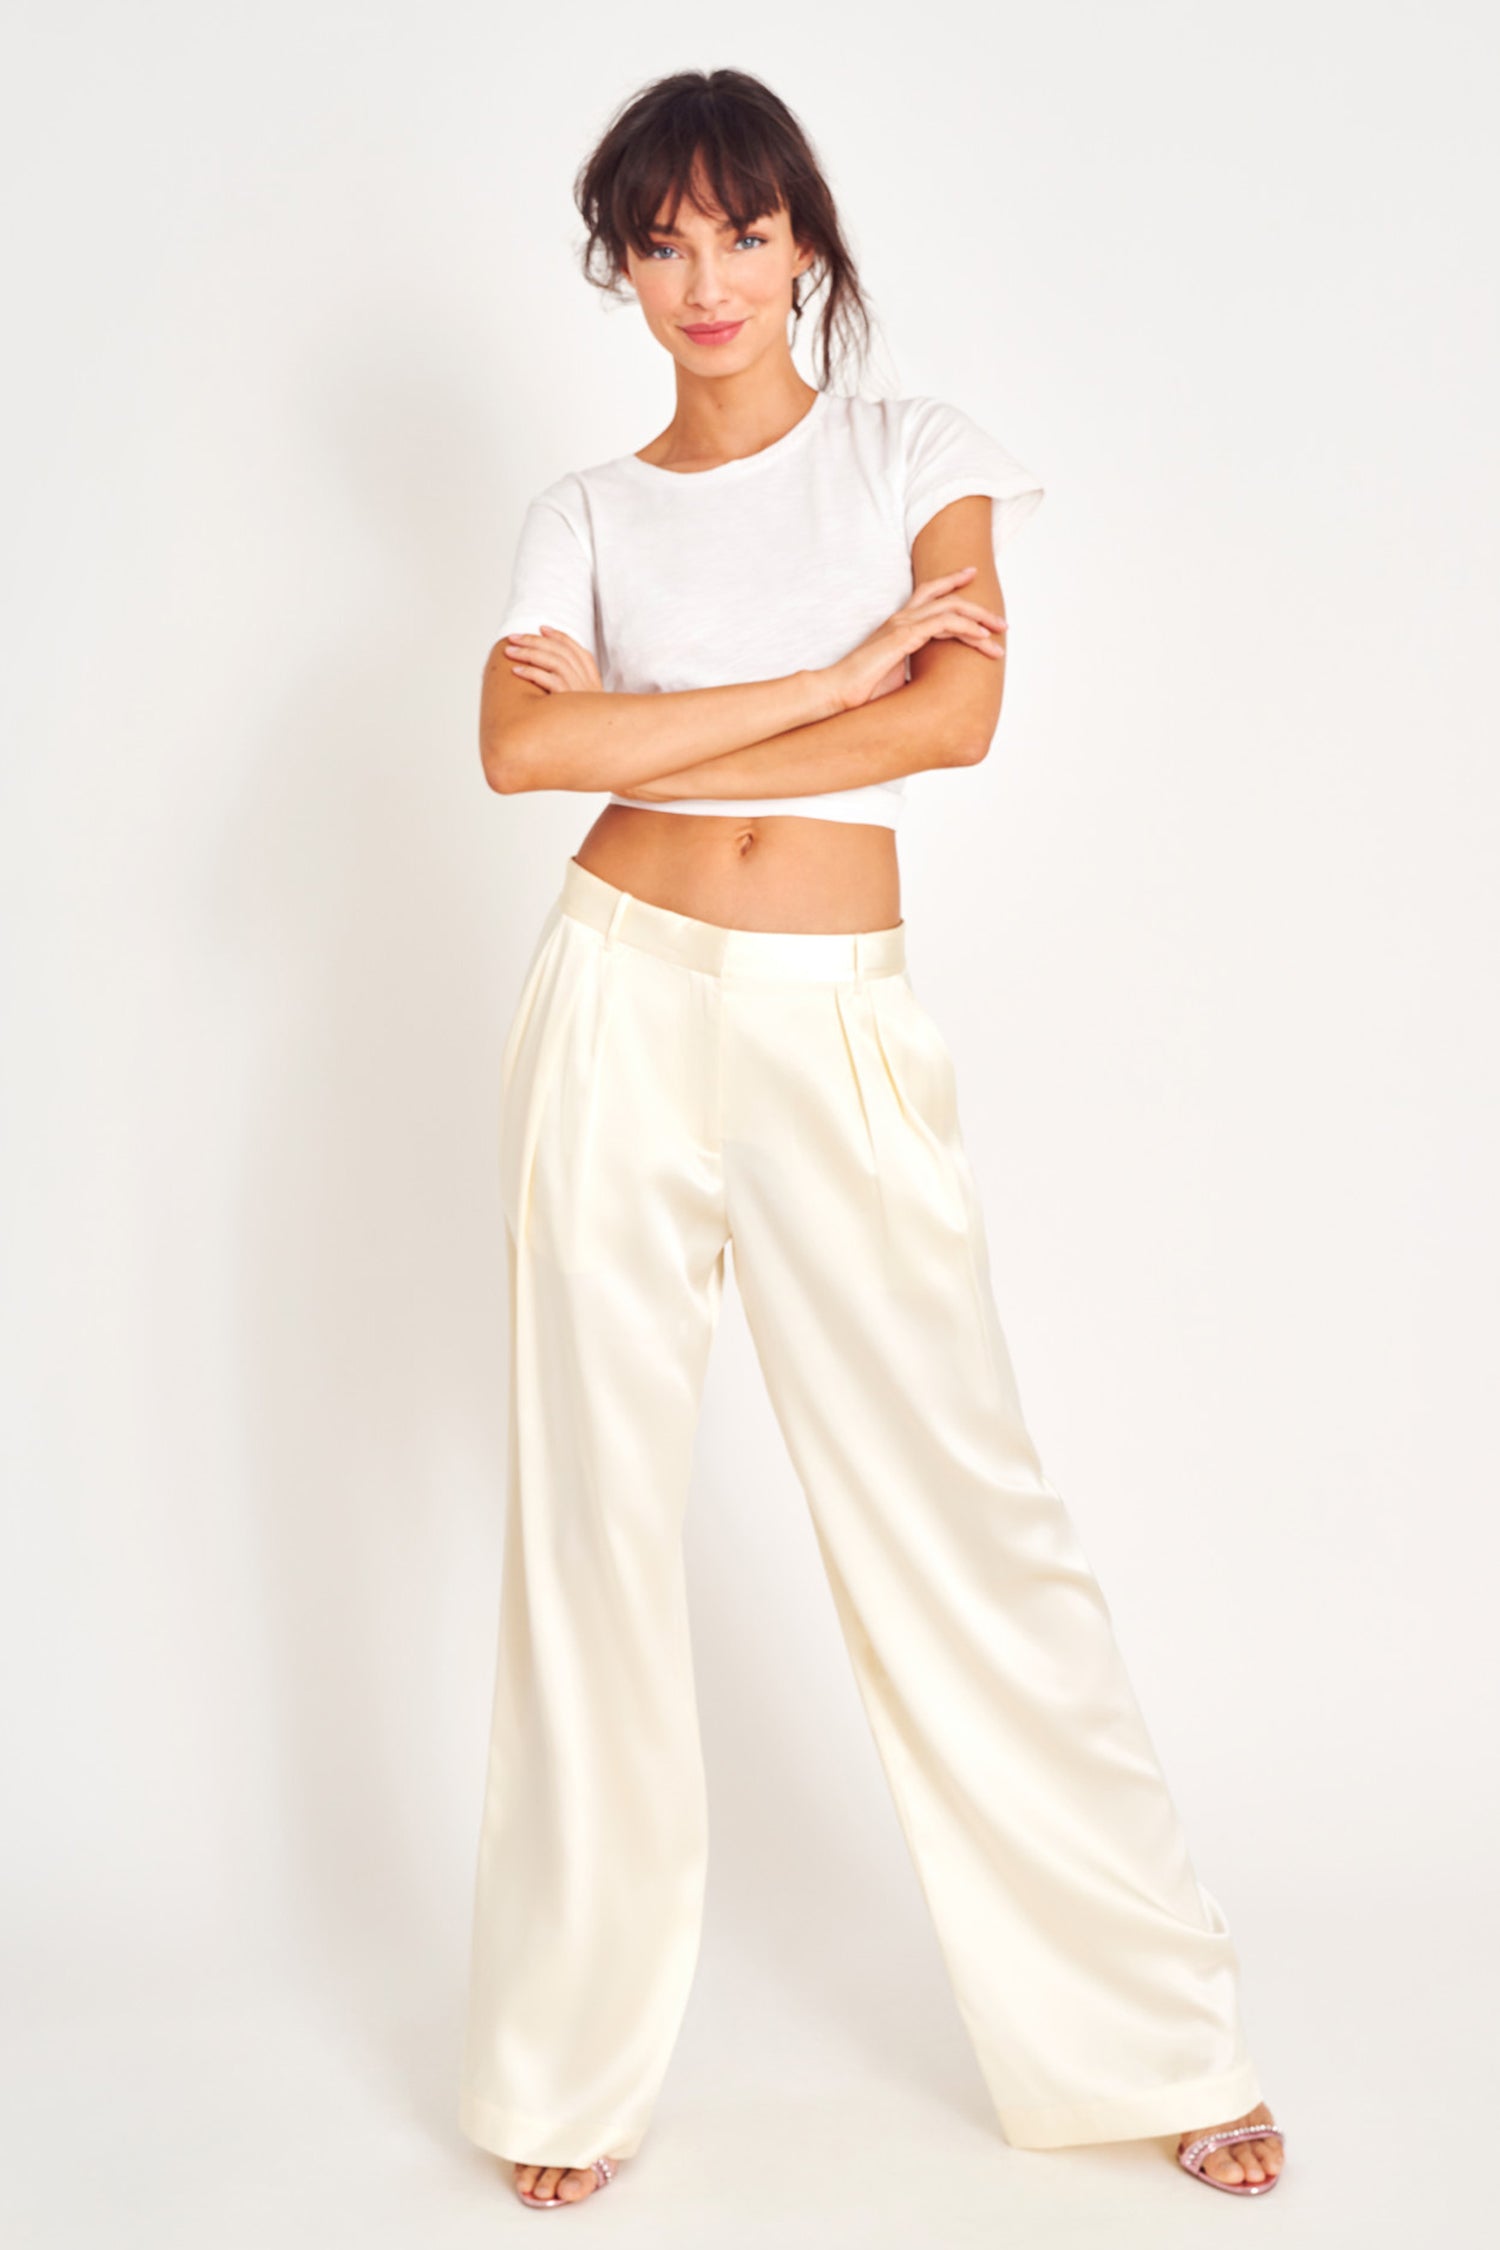 34 Silk Pants to Love: The Chic Trend That's Here to Stay